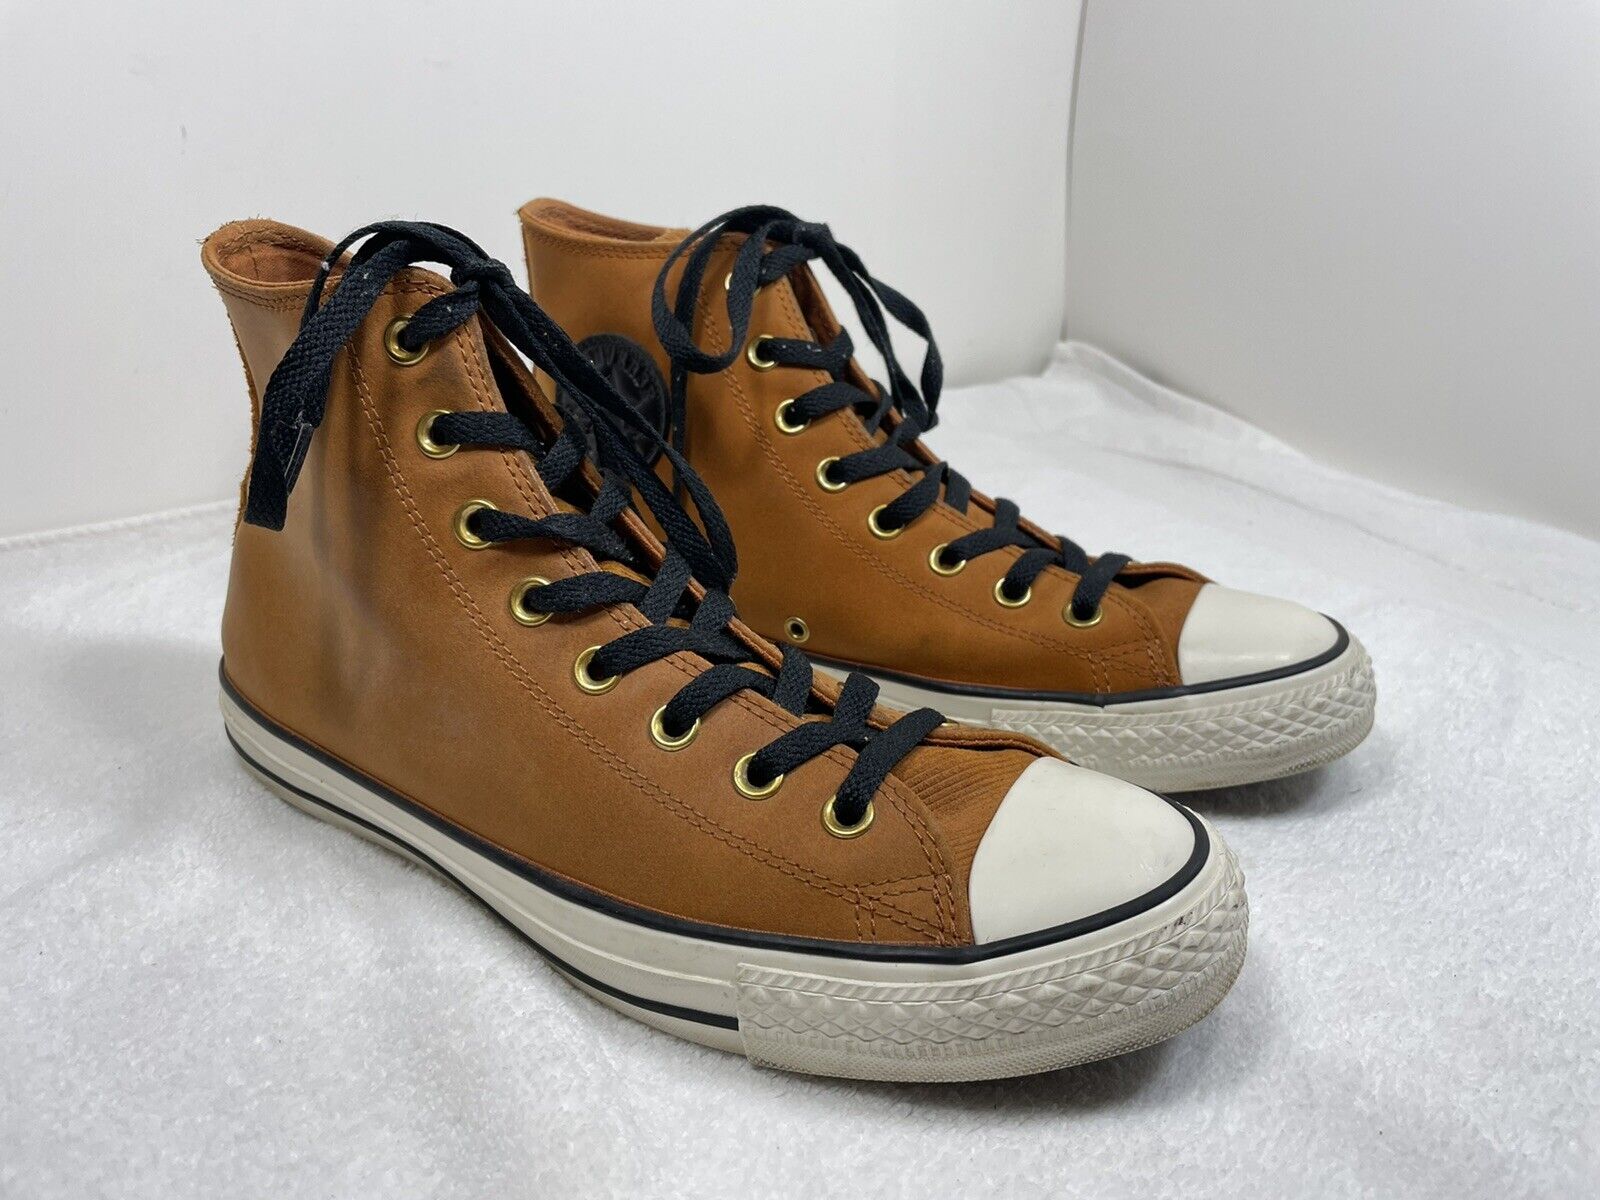 Converse All Star Chuck Taylor High Tops Ginger Brown Suede Men 9 Wom11  53807C | eBay